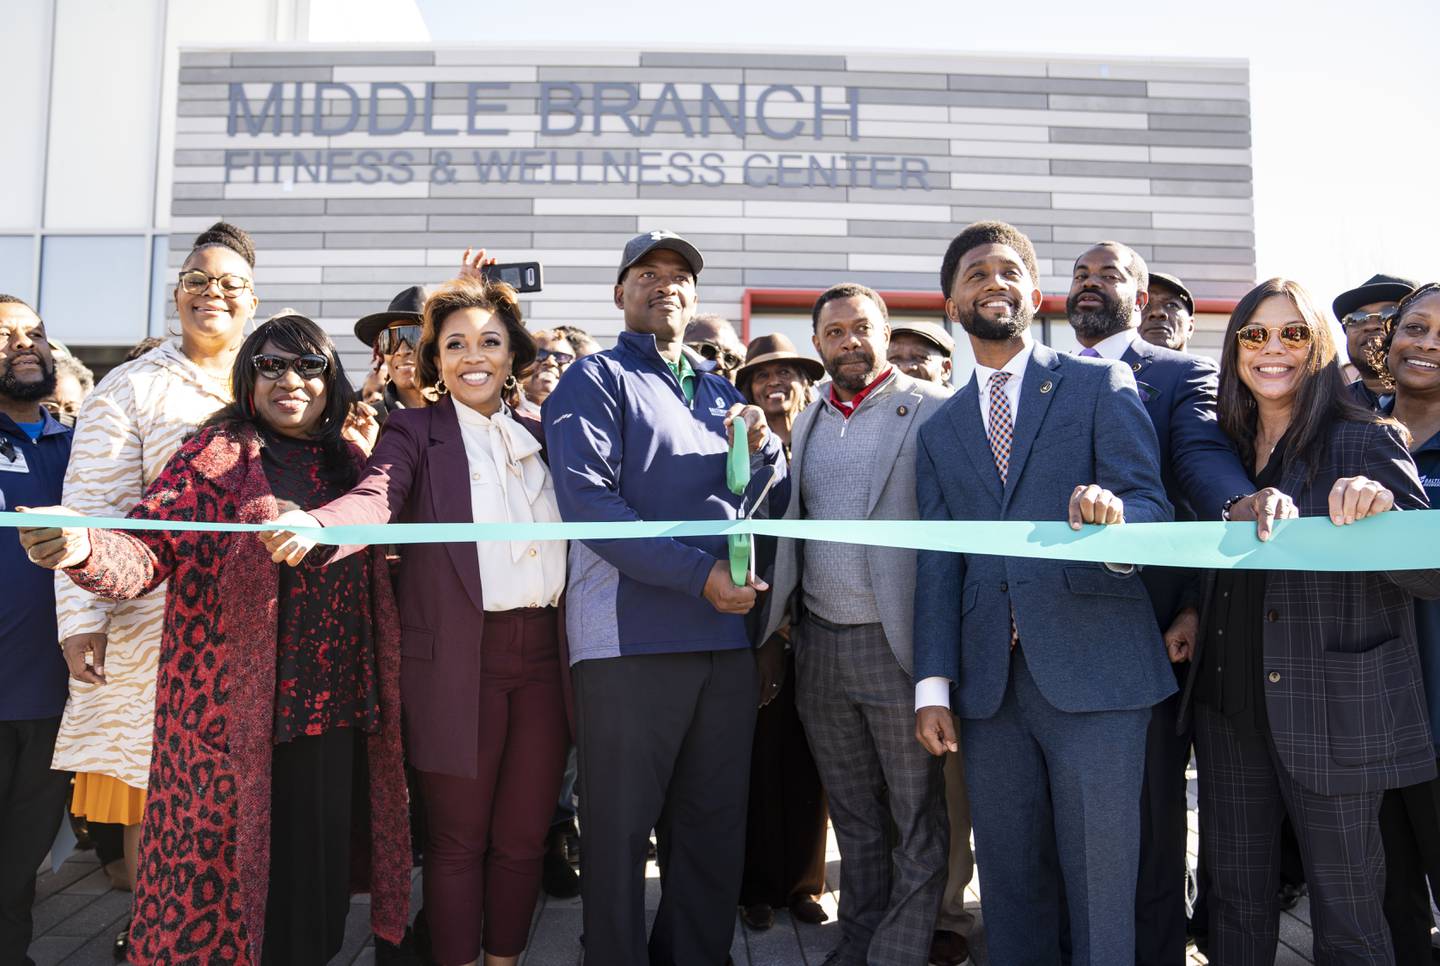 Phillip Blackwell Director of Middle Branch Fitness and Wellness Center cuts a ribbon alongside Mayor Brandon Scott and other Parks and Rec employees during the ribbon cutting ceremony for Middle Branch Fitness and Wellness Center, in Baltimore, Wednesday, November 9, 2022.